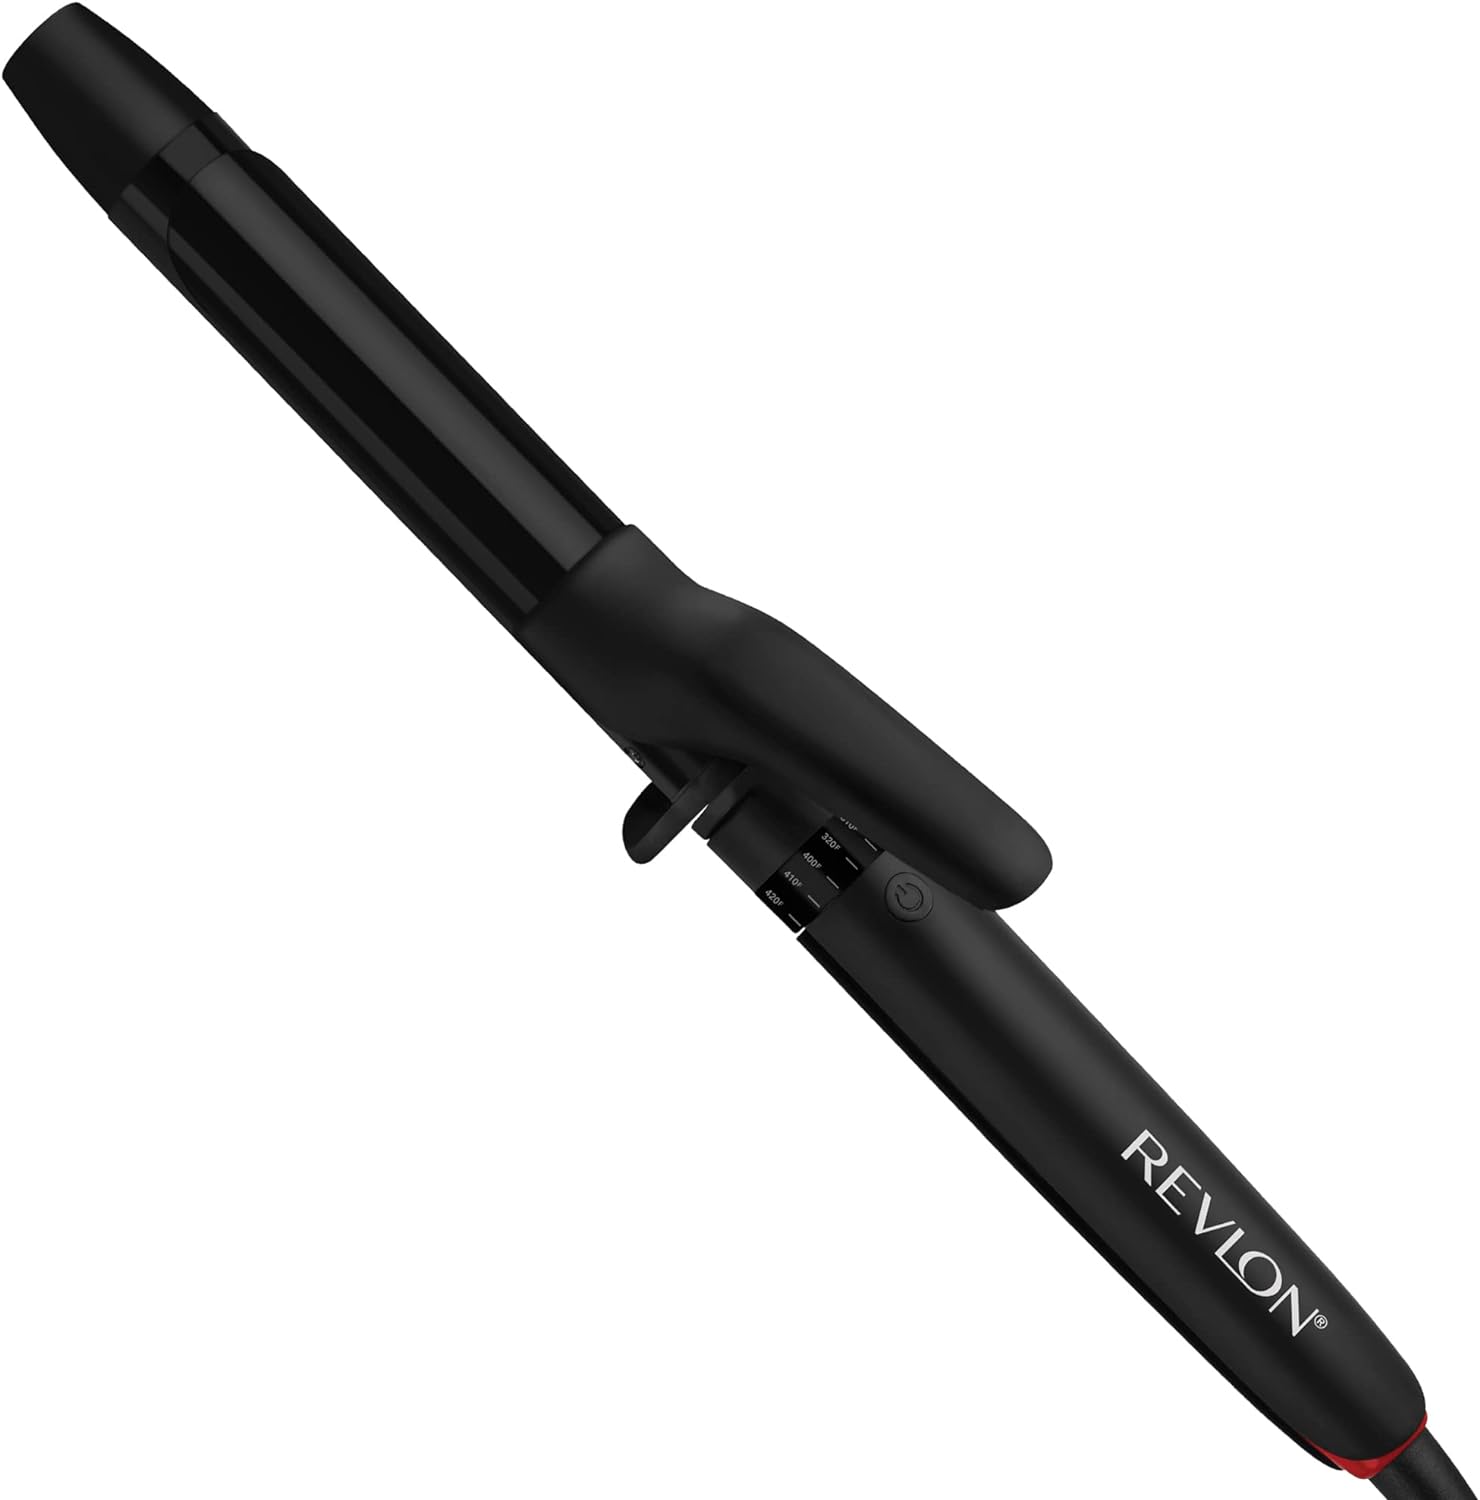 1" Revlon SmoothStay Coconut Oil-Infused Hair Curling Iron $9.47 + Free Shipping w/ Prime or on $35+